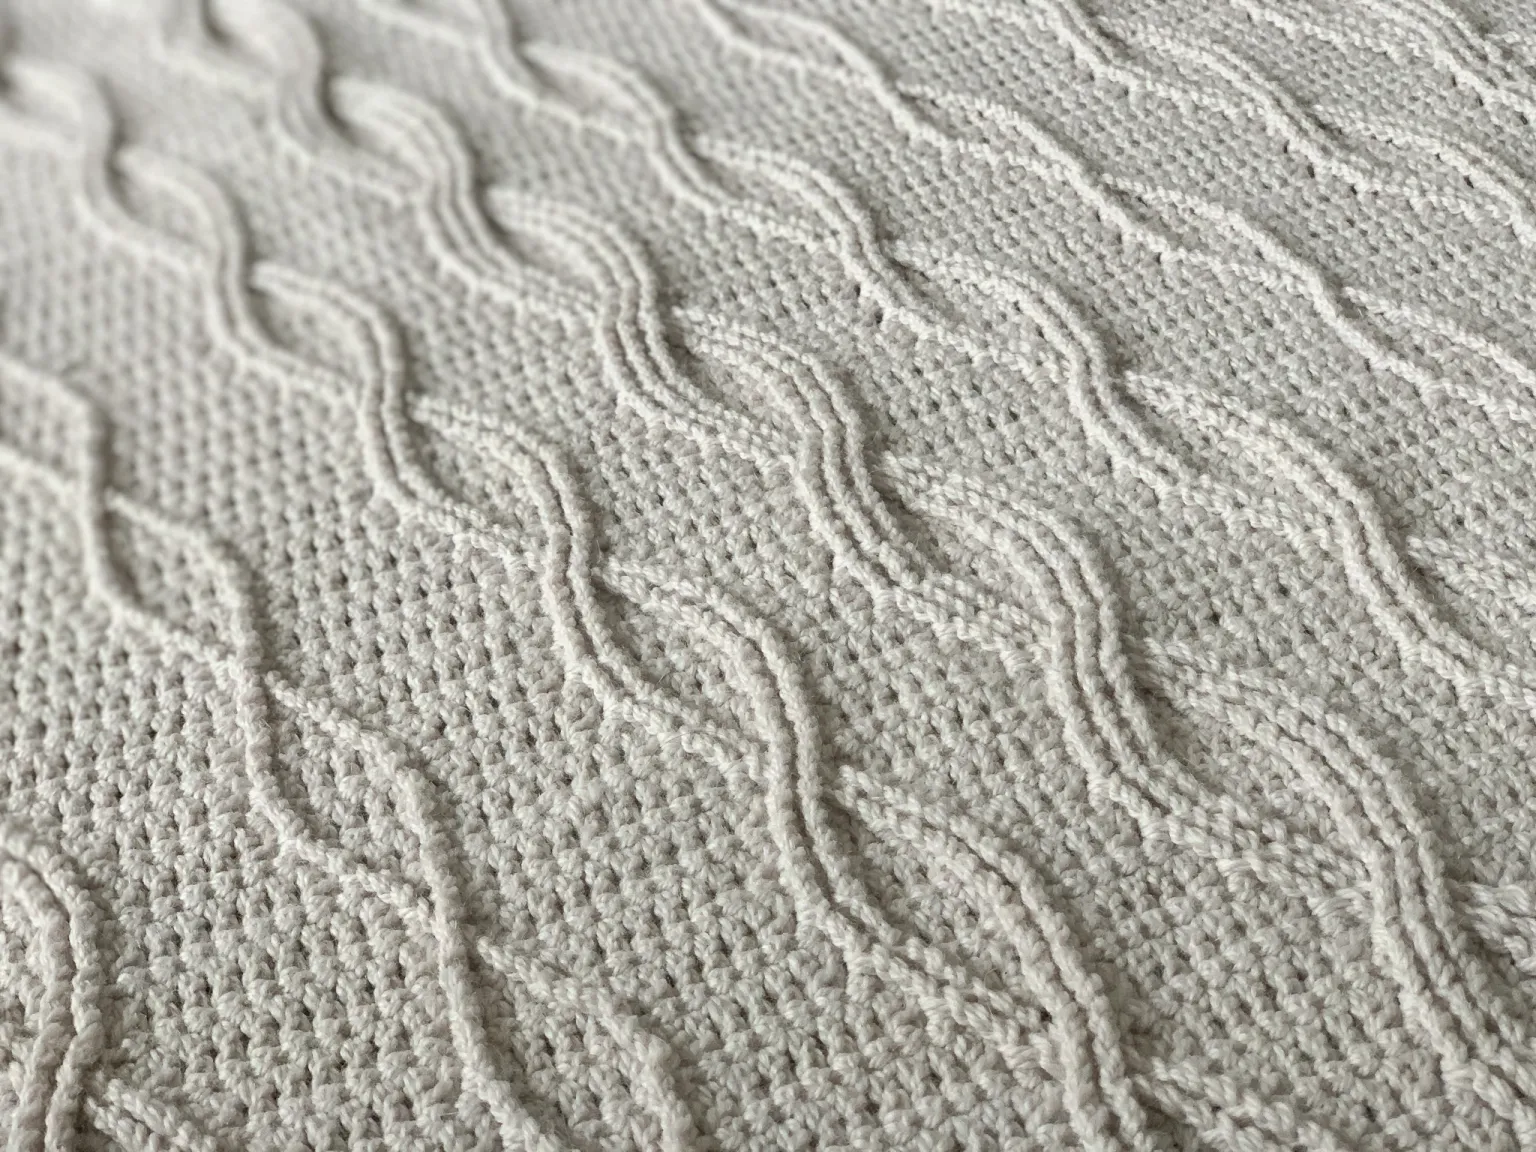 crochet blanket with crossed cable stitches